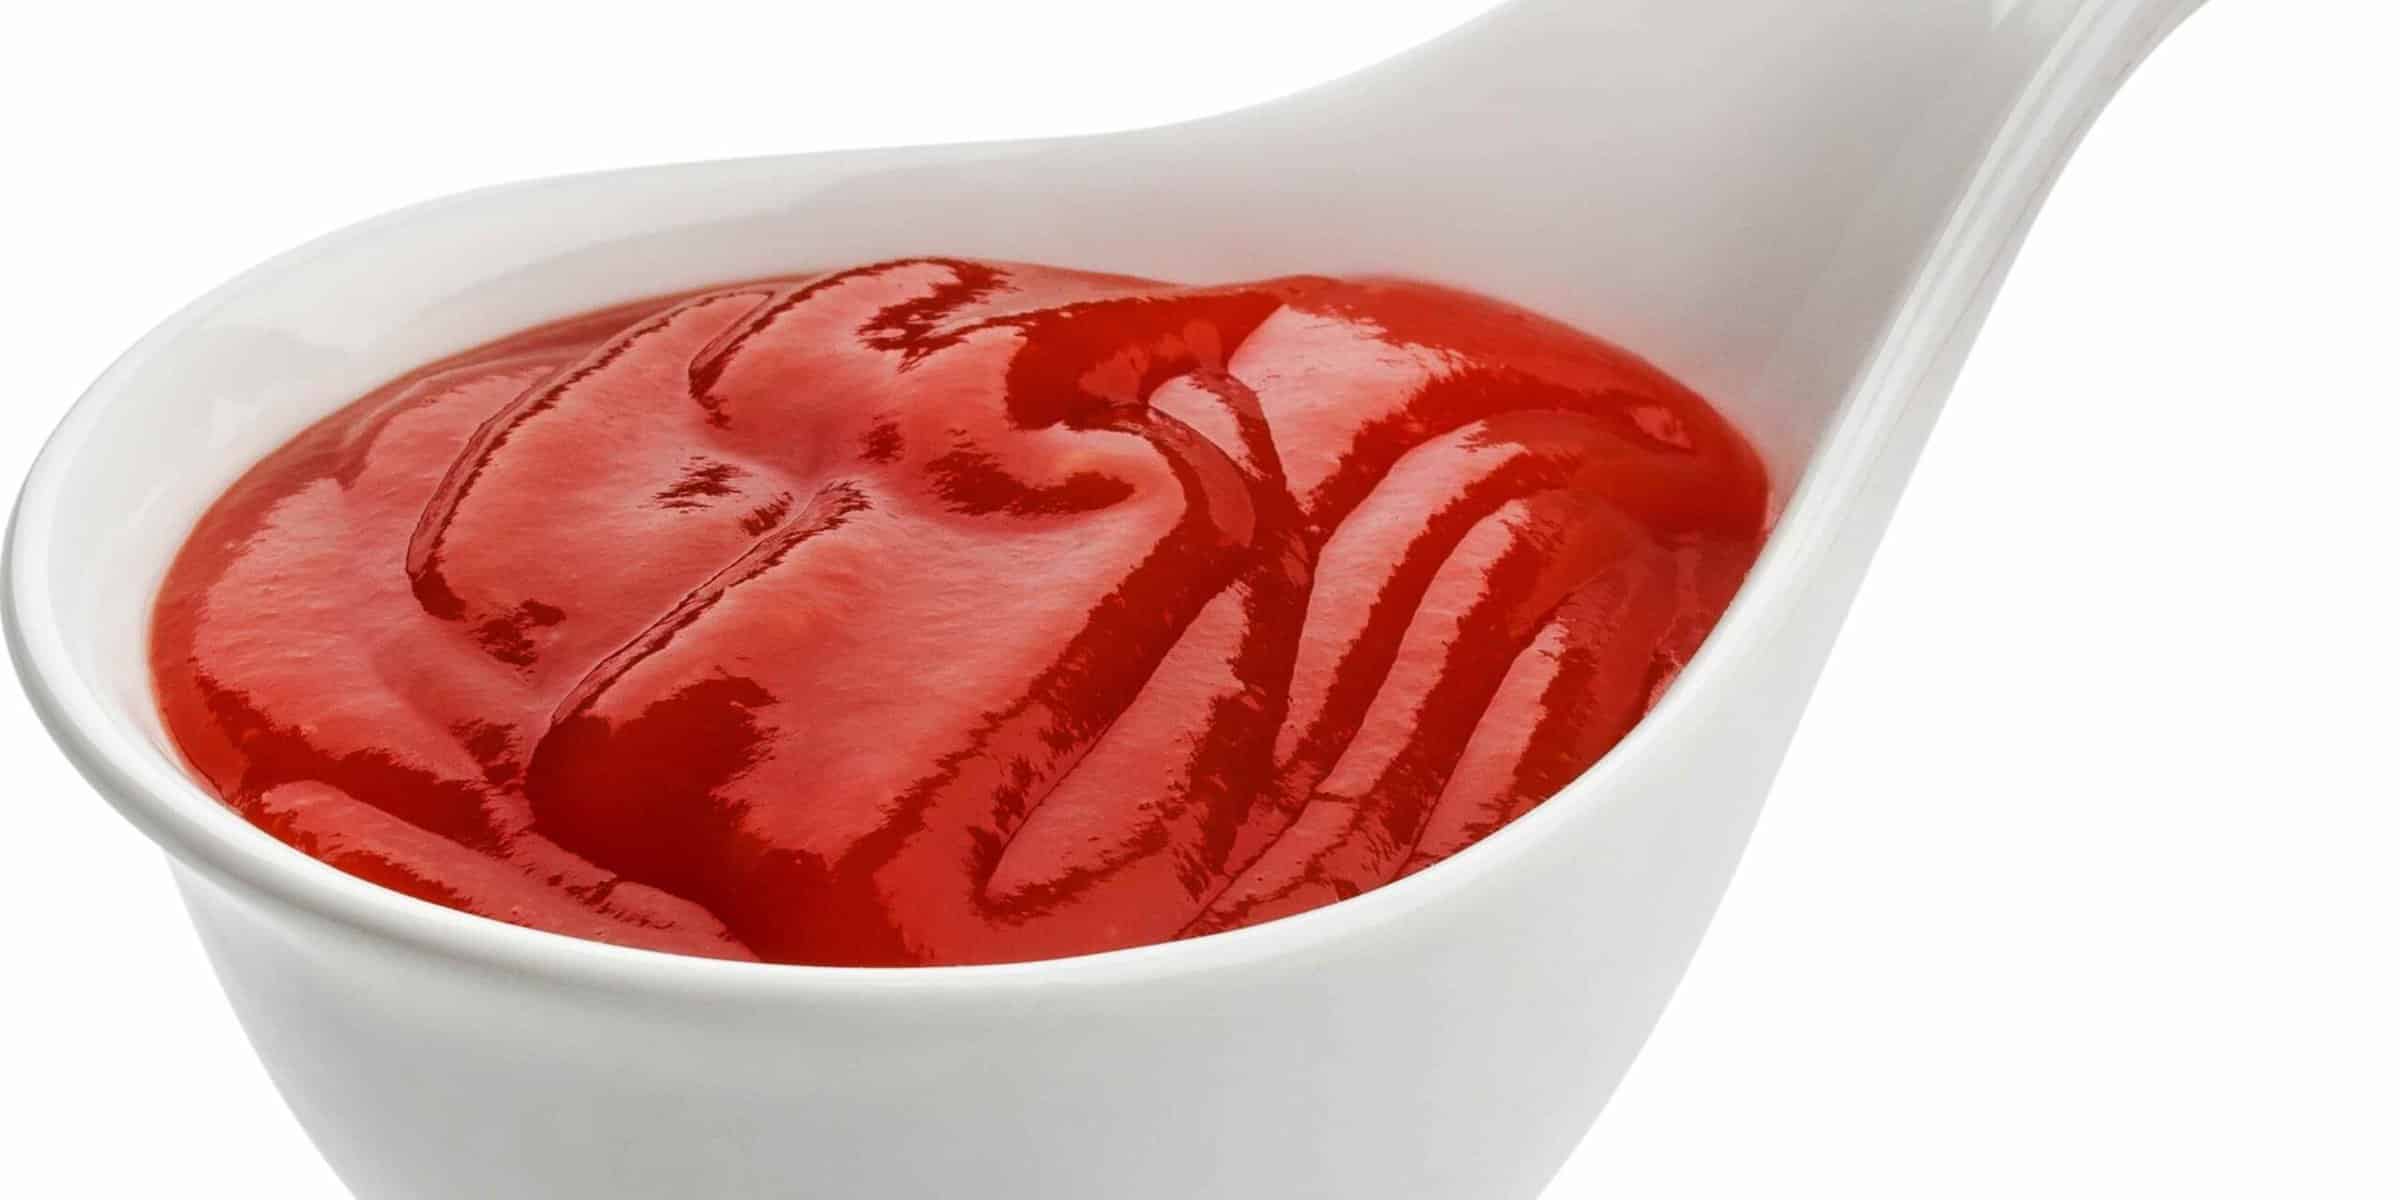 11 Mind Blowing Cleaning Hacks Using Ketchup